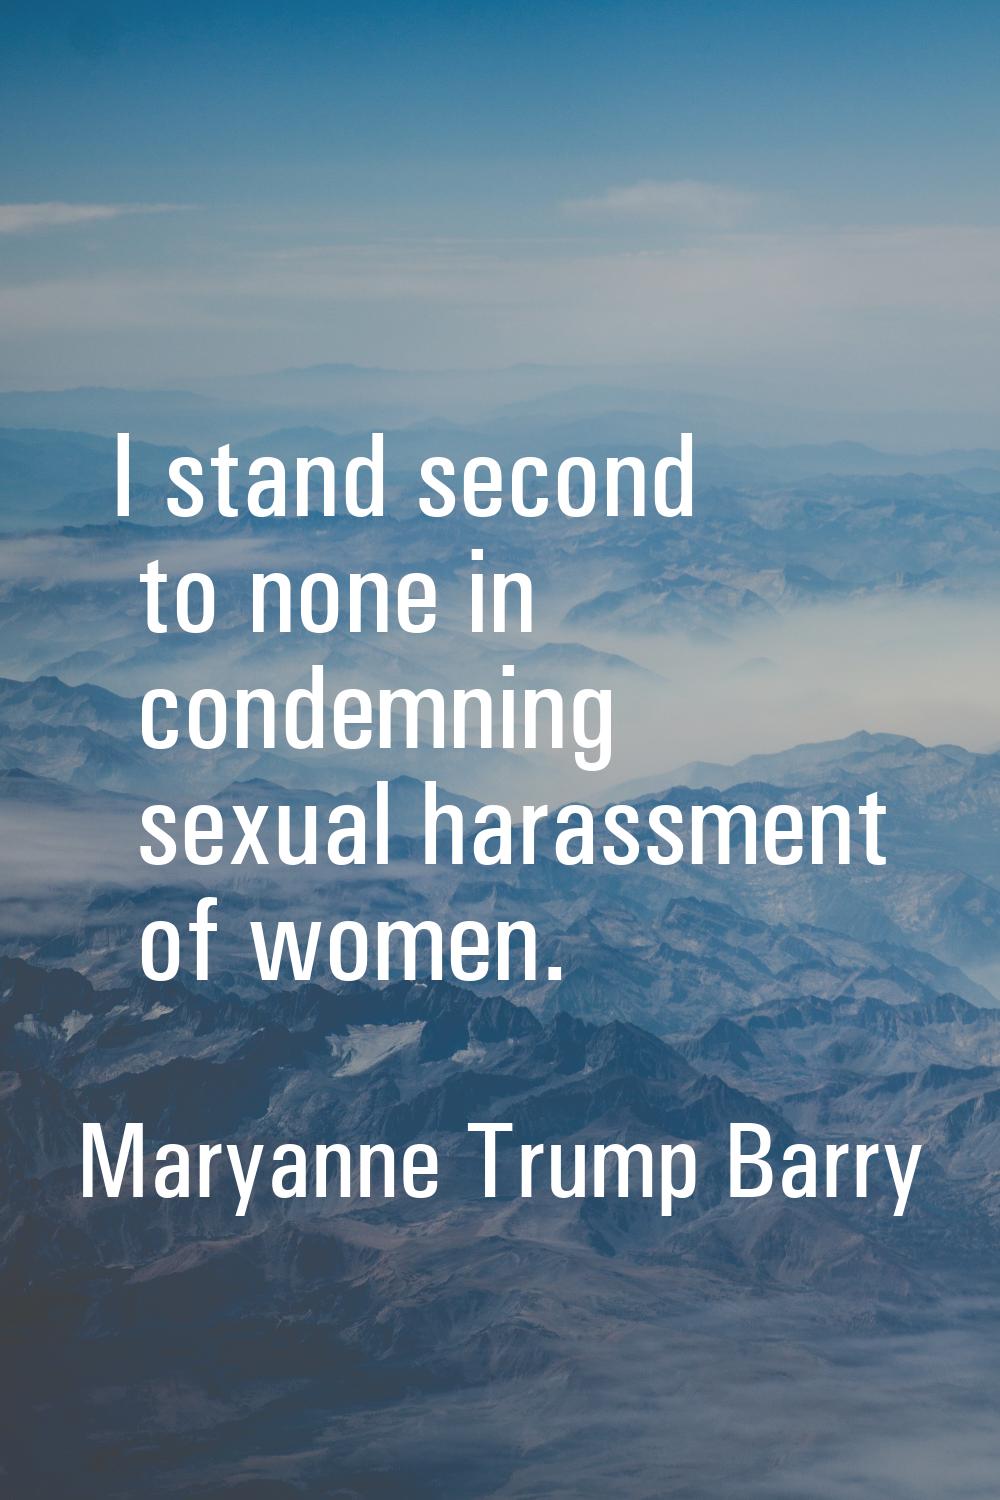 I stand second to none in condemning sexual harassment of women.